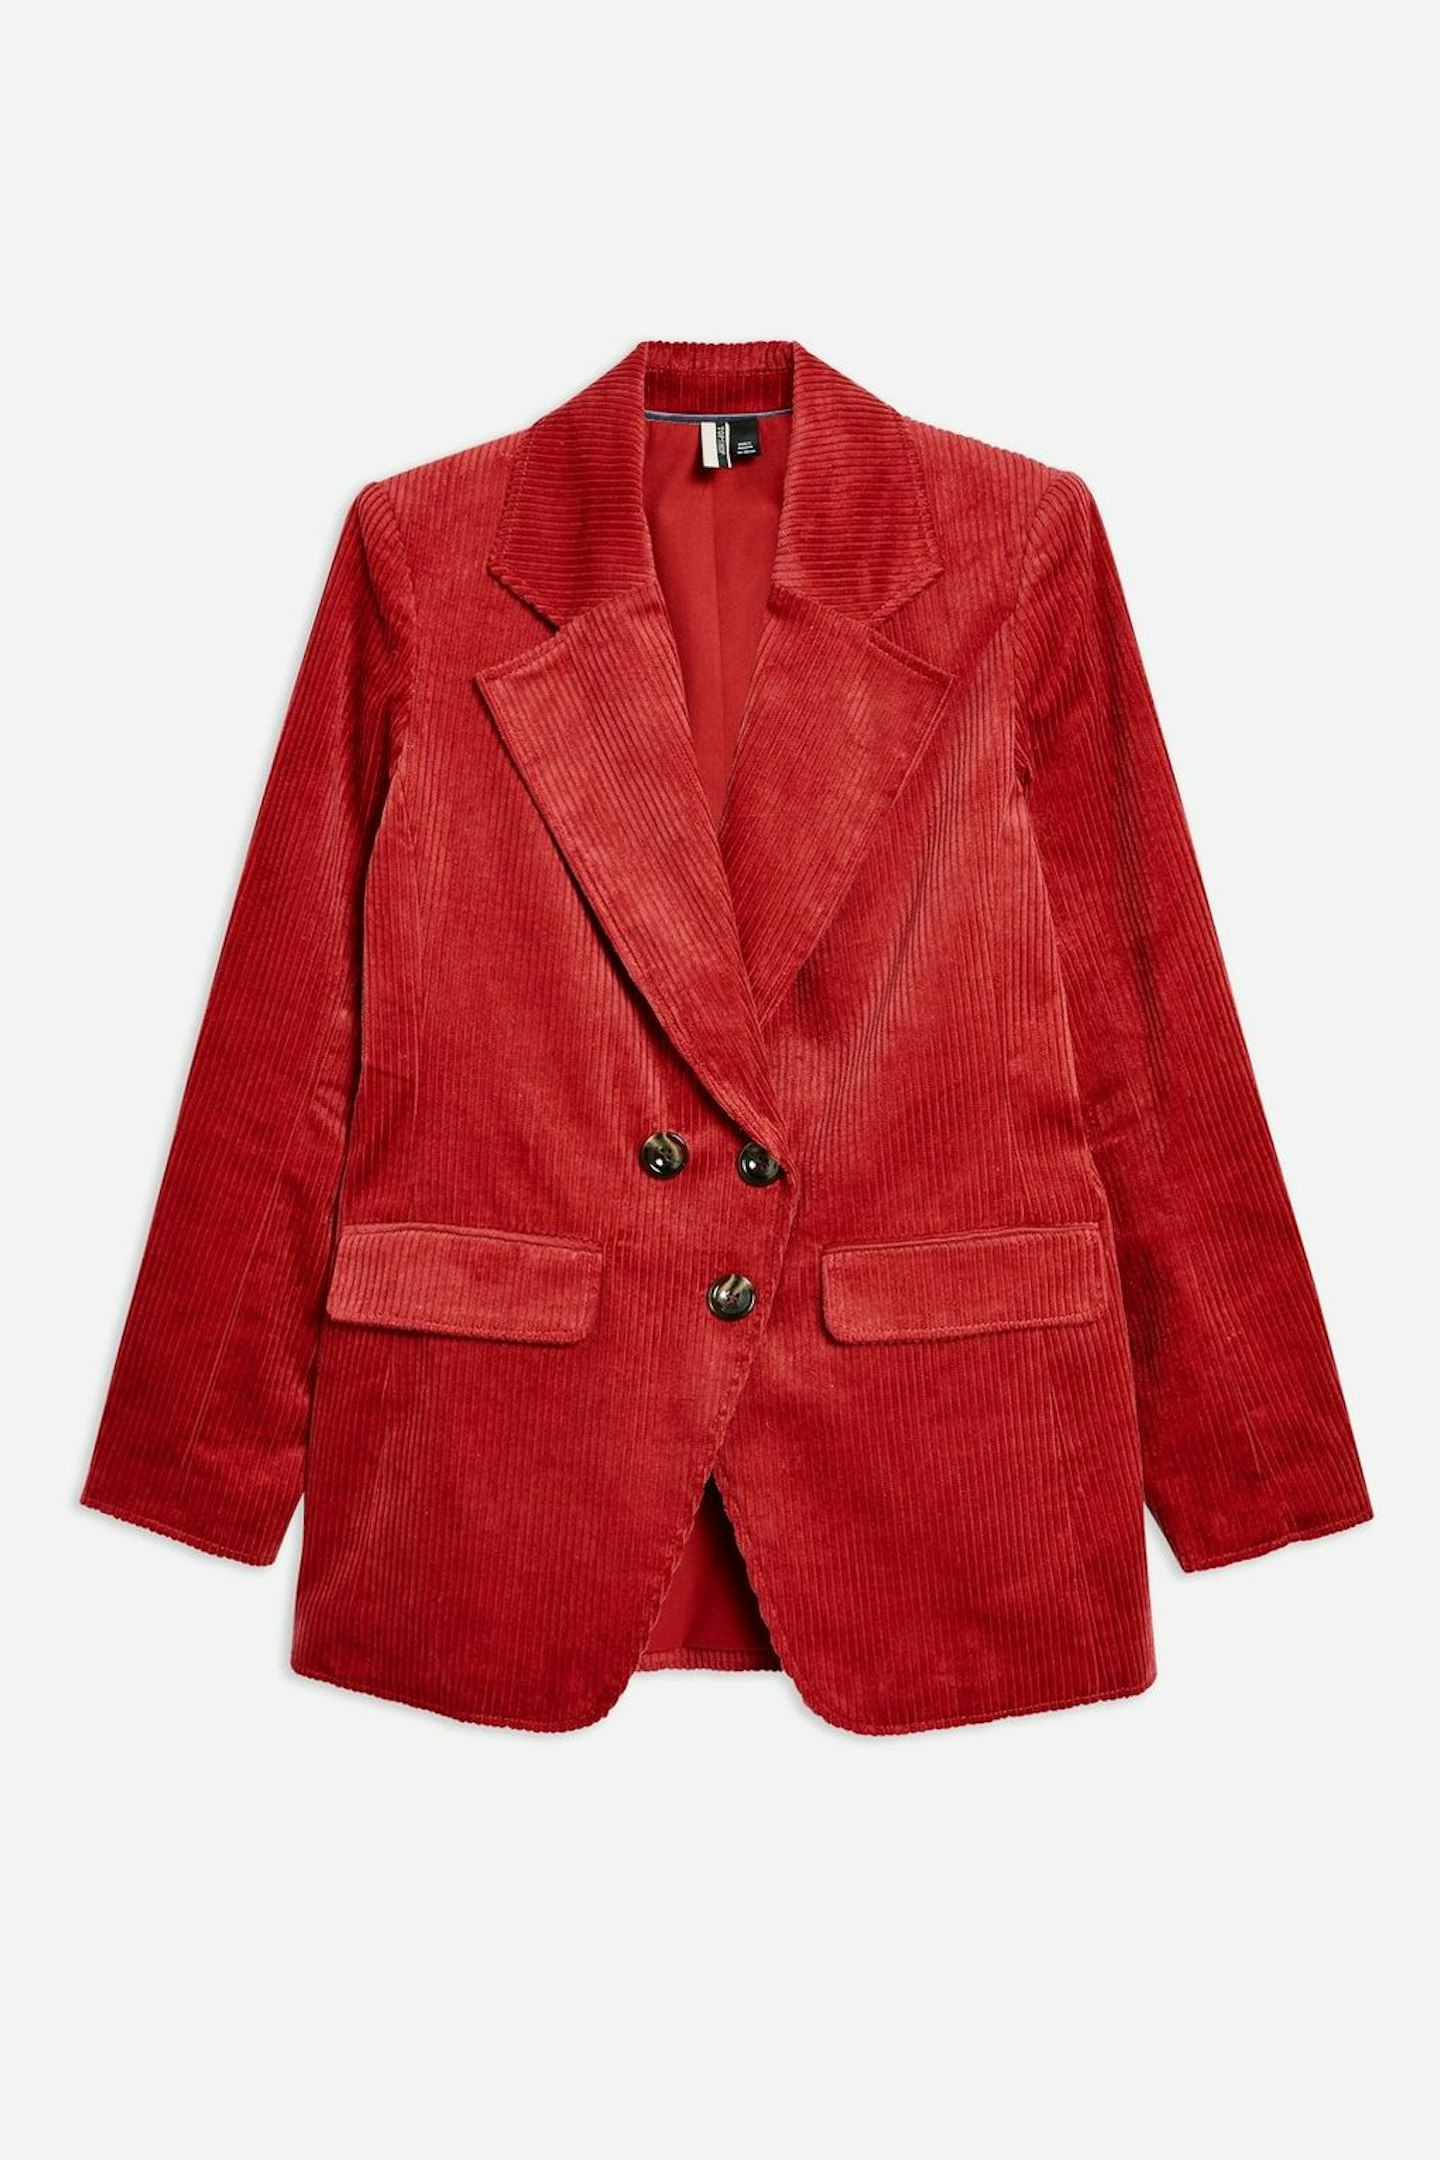 Topshop, Corduroy Double Breasted Blazer, £65